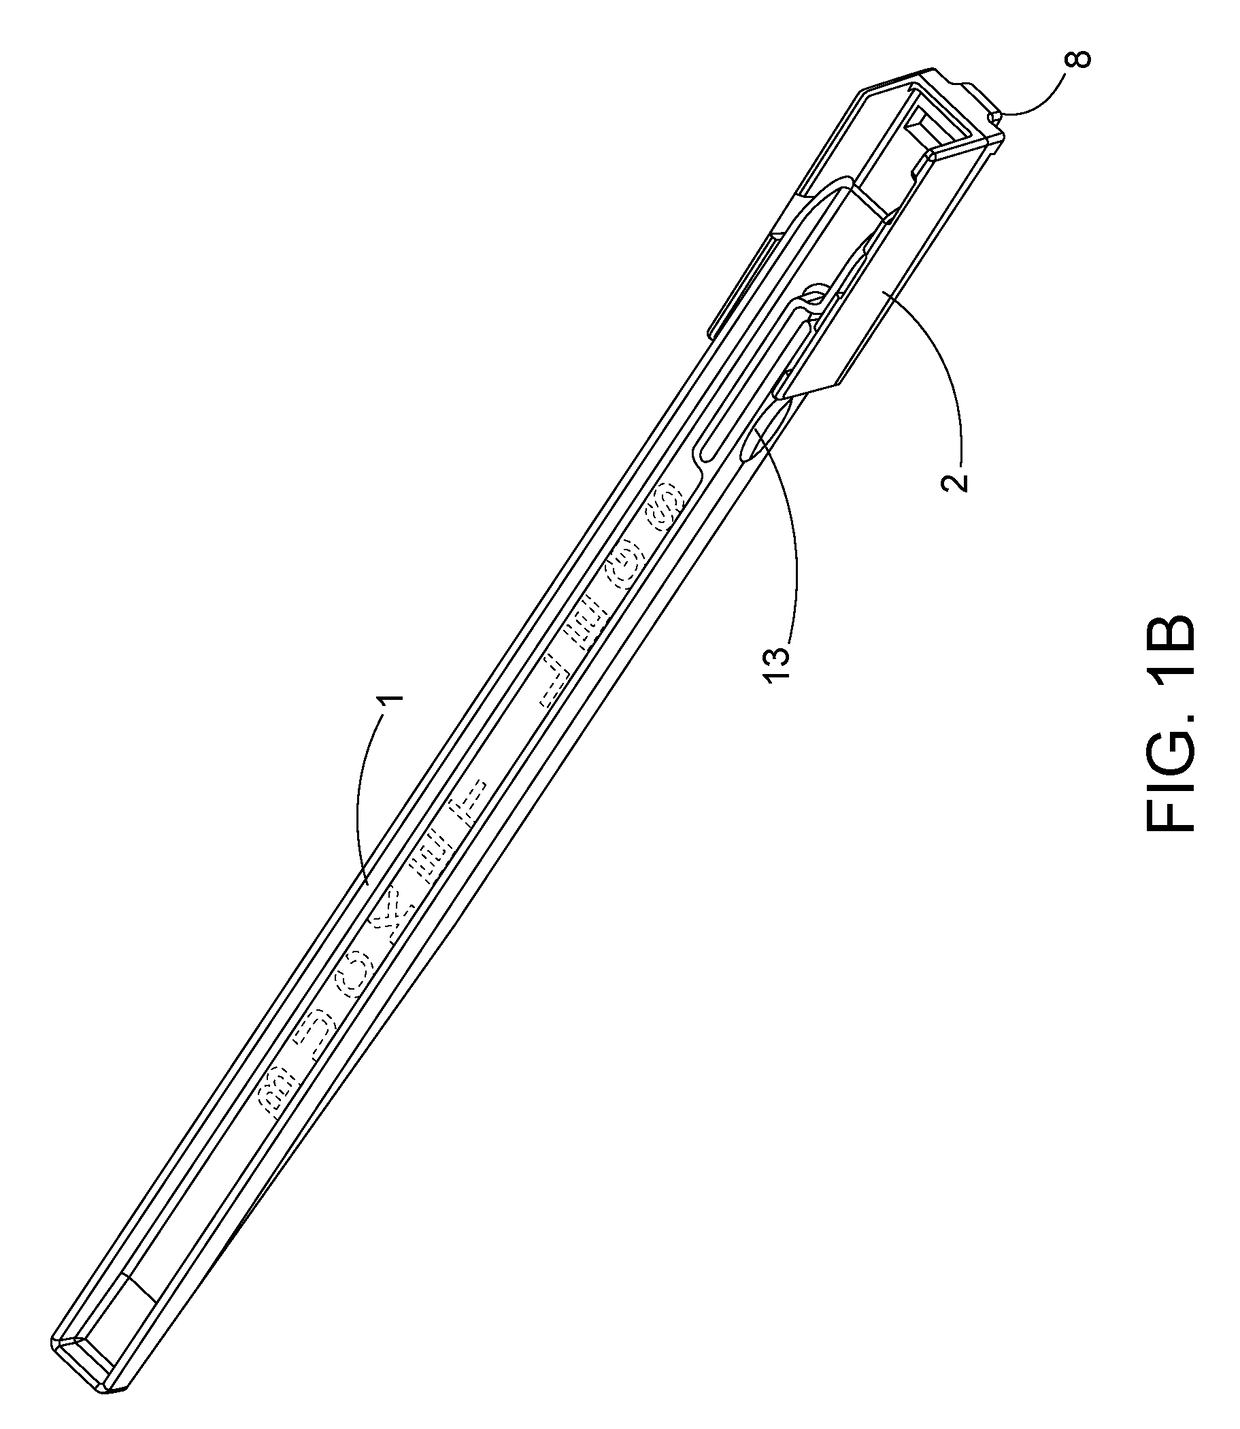 Locking and folding assembly for attachment to a bucket or other container